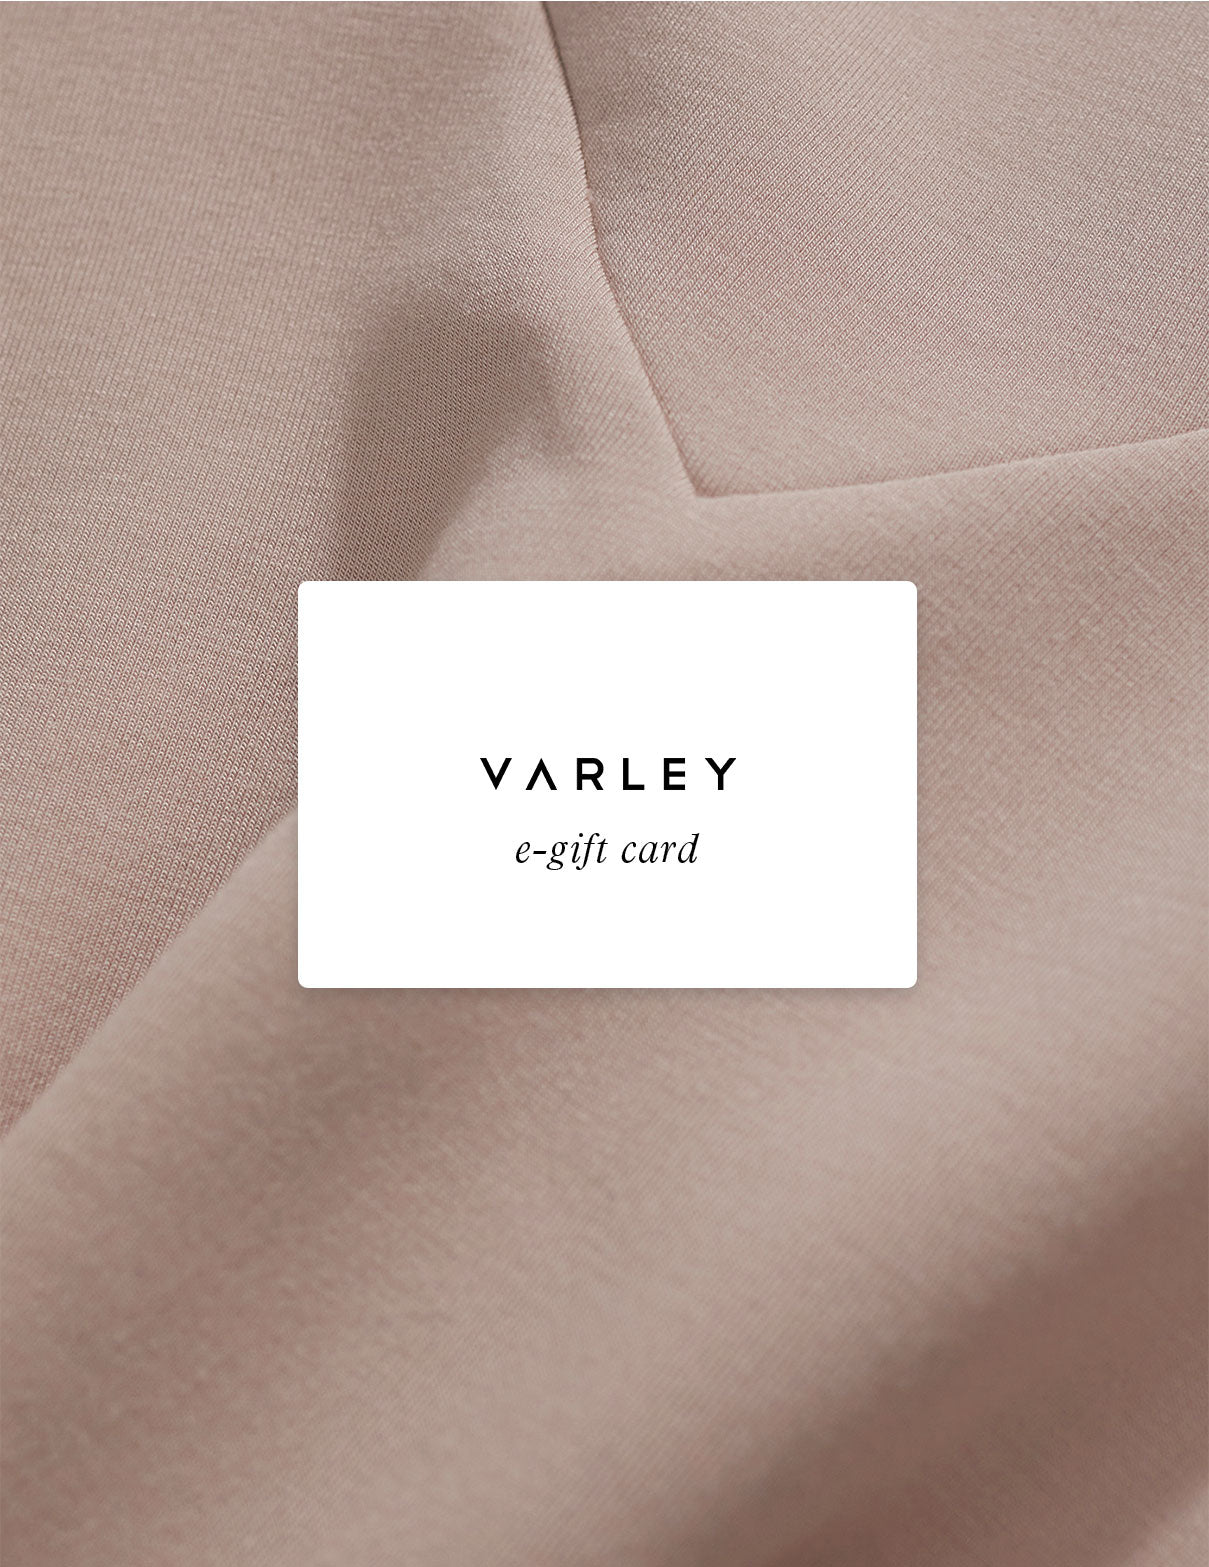 How to Achieve the Varley Look for Less - A Jetset Journal